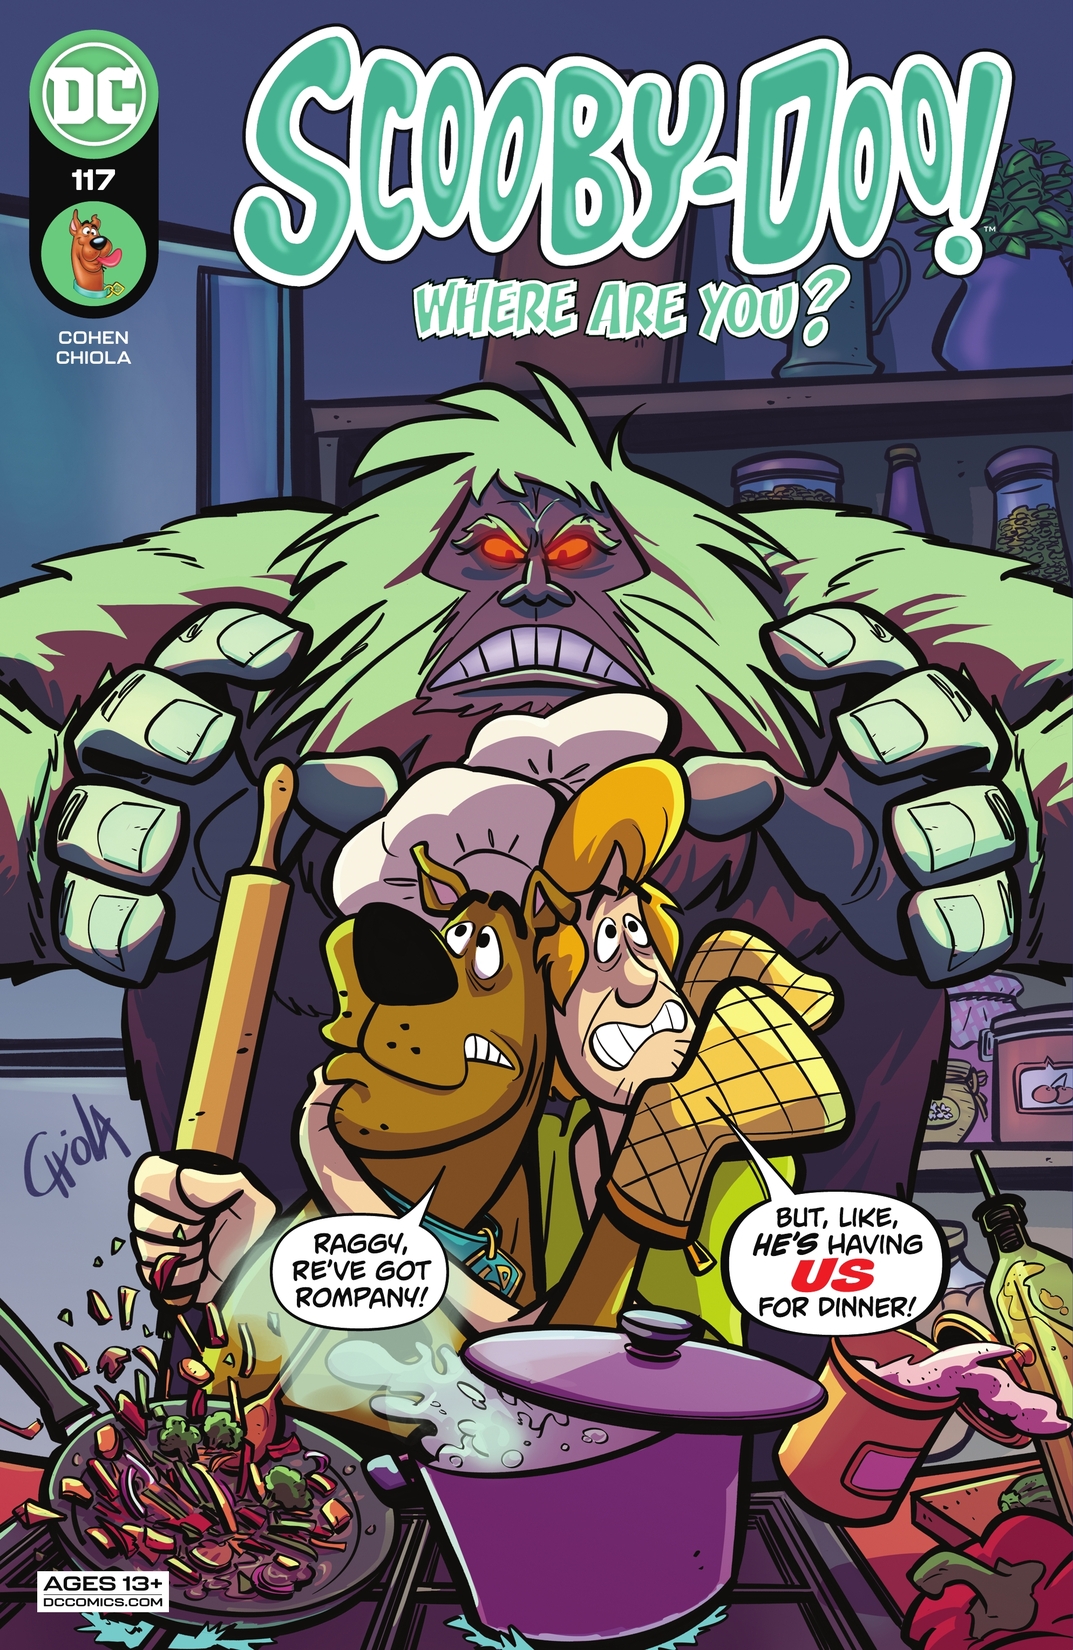 Scooby-Doo, Where Are You? #117 preview images